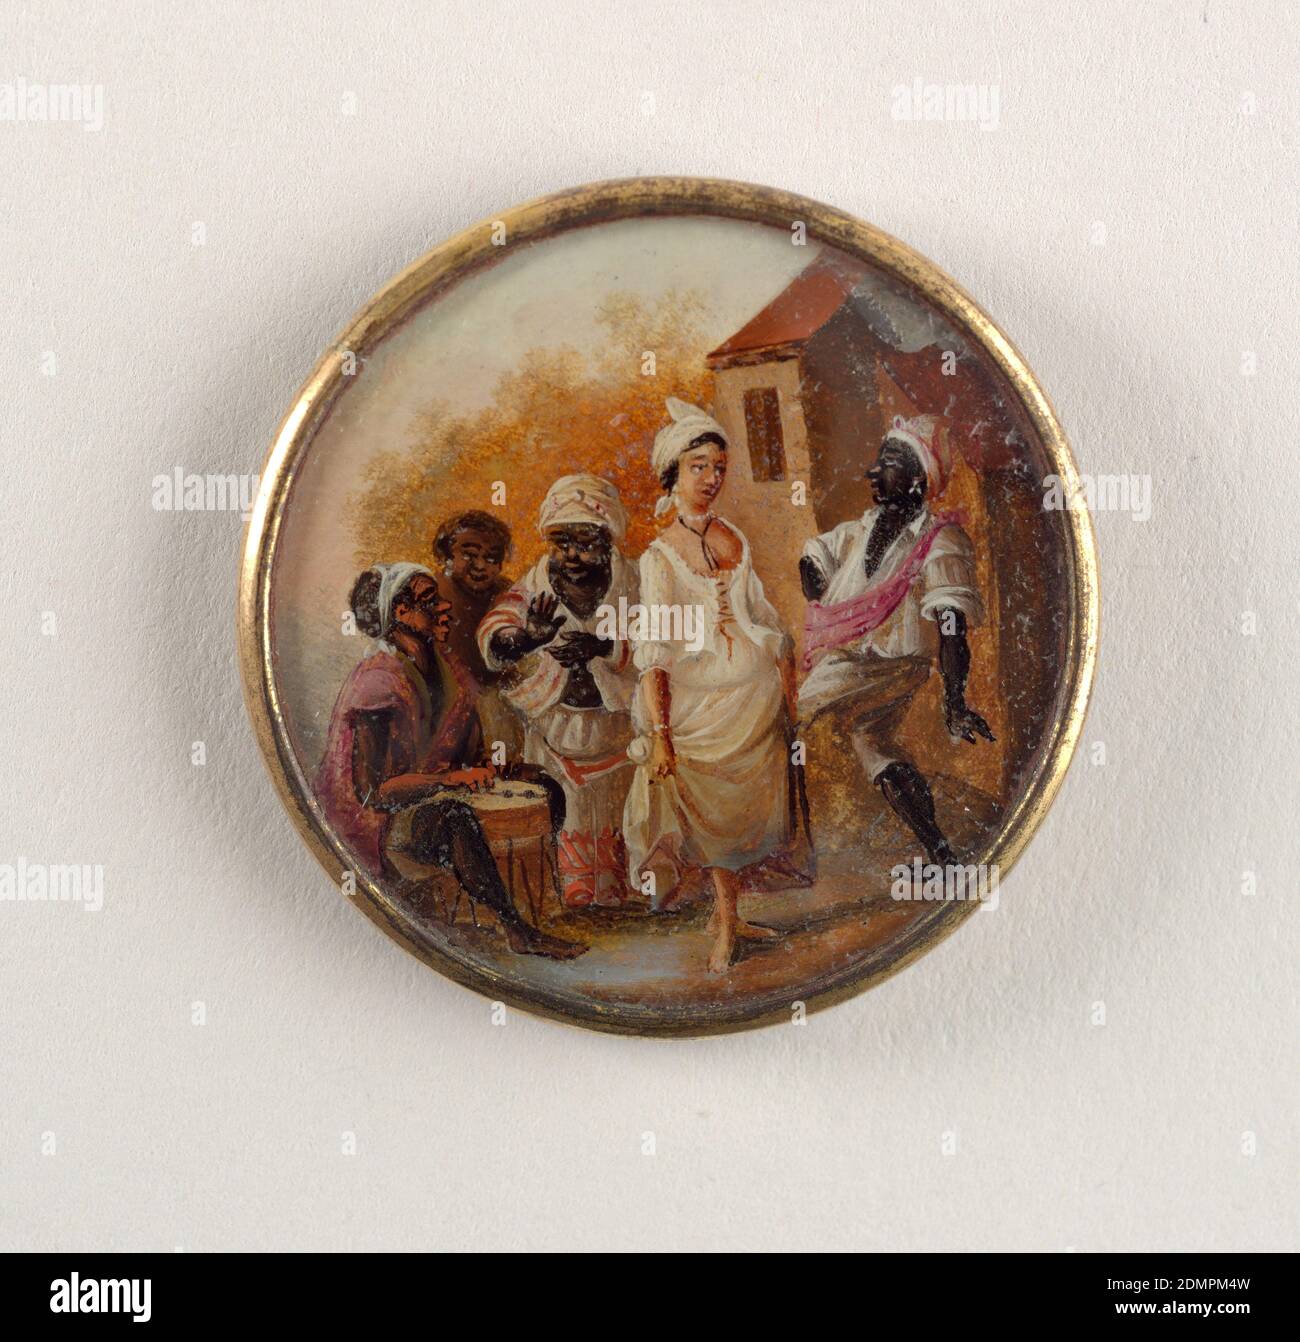 Button, Gouache paint on tin verre fixé, ivory (backing), glass, gilt metal, Button depicting scene of five figures outside near a large house. From left: a seated man, wearing a pink shirt, playing a drum, a woman with only head visible standing behind another woman, wear white with pink stripes, who claps [to the music]. In the foreground, a lighter skinned woman wearing an open corset and skirt dances with a man who wears white clothing and a pink sash., late 18th century, costume & accessories, Decorative Arts, Button Stock Photo